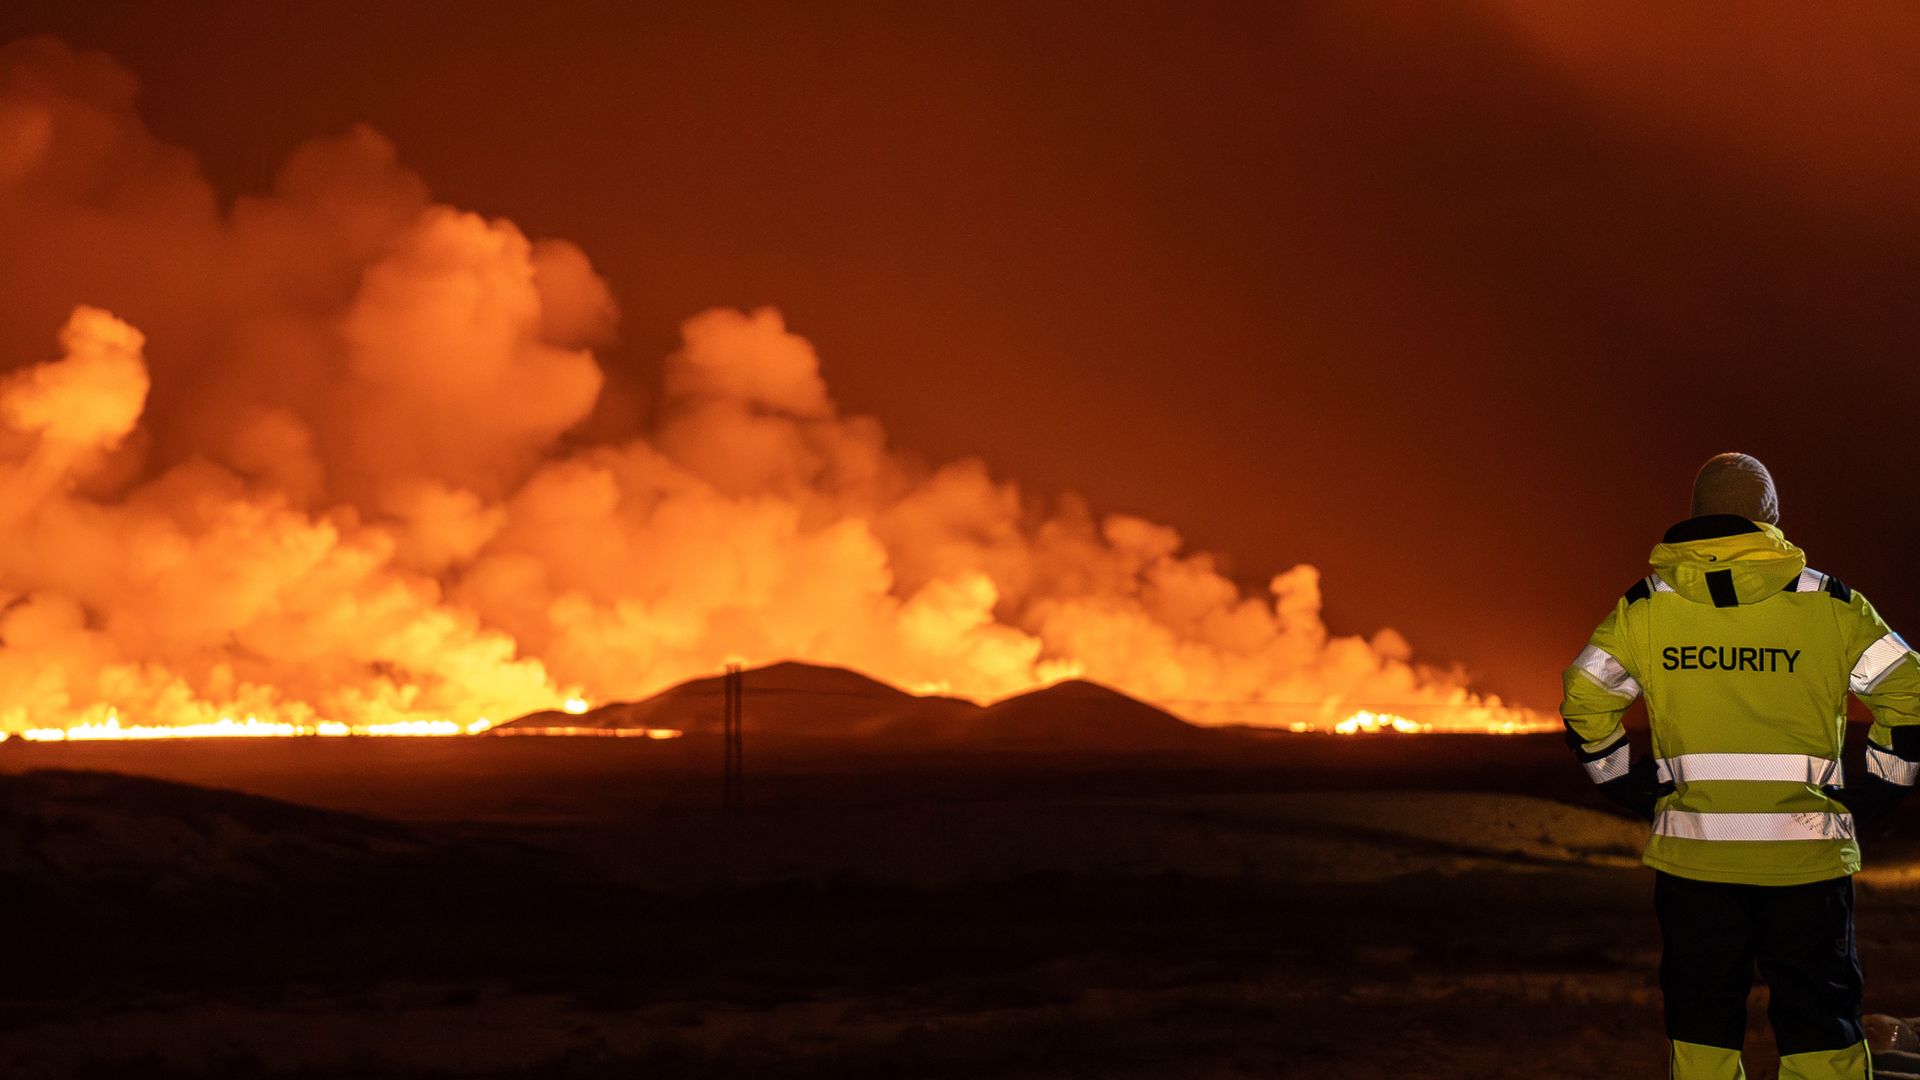 A volcano erupted in the in Iceland and sent a river of lava toward surrounding towns following weeks of seismic activity.